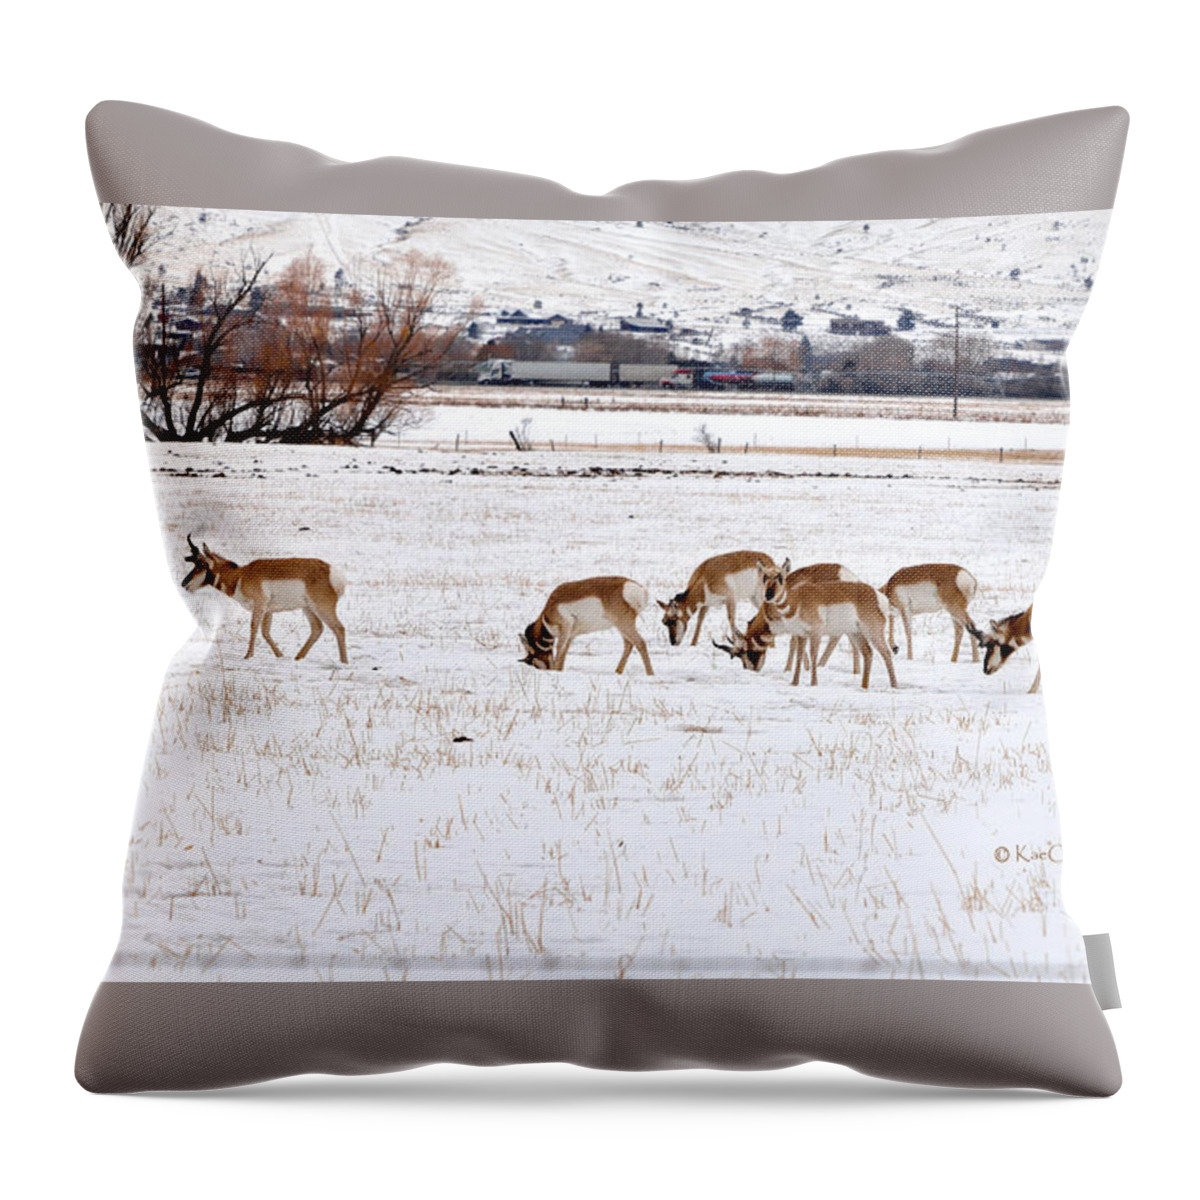 Pronghorn Throw Pillow featuring the photograph Pronghorn in Snow by Kae Cheatham